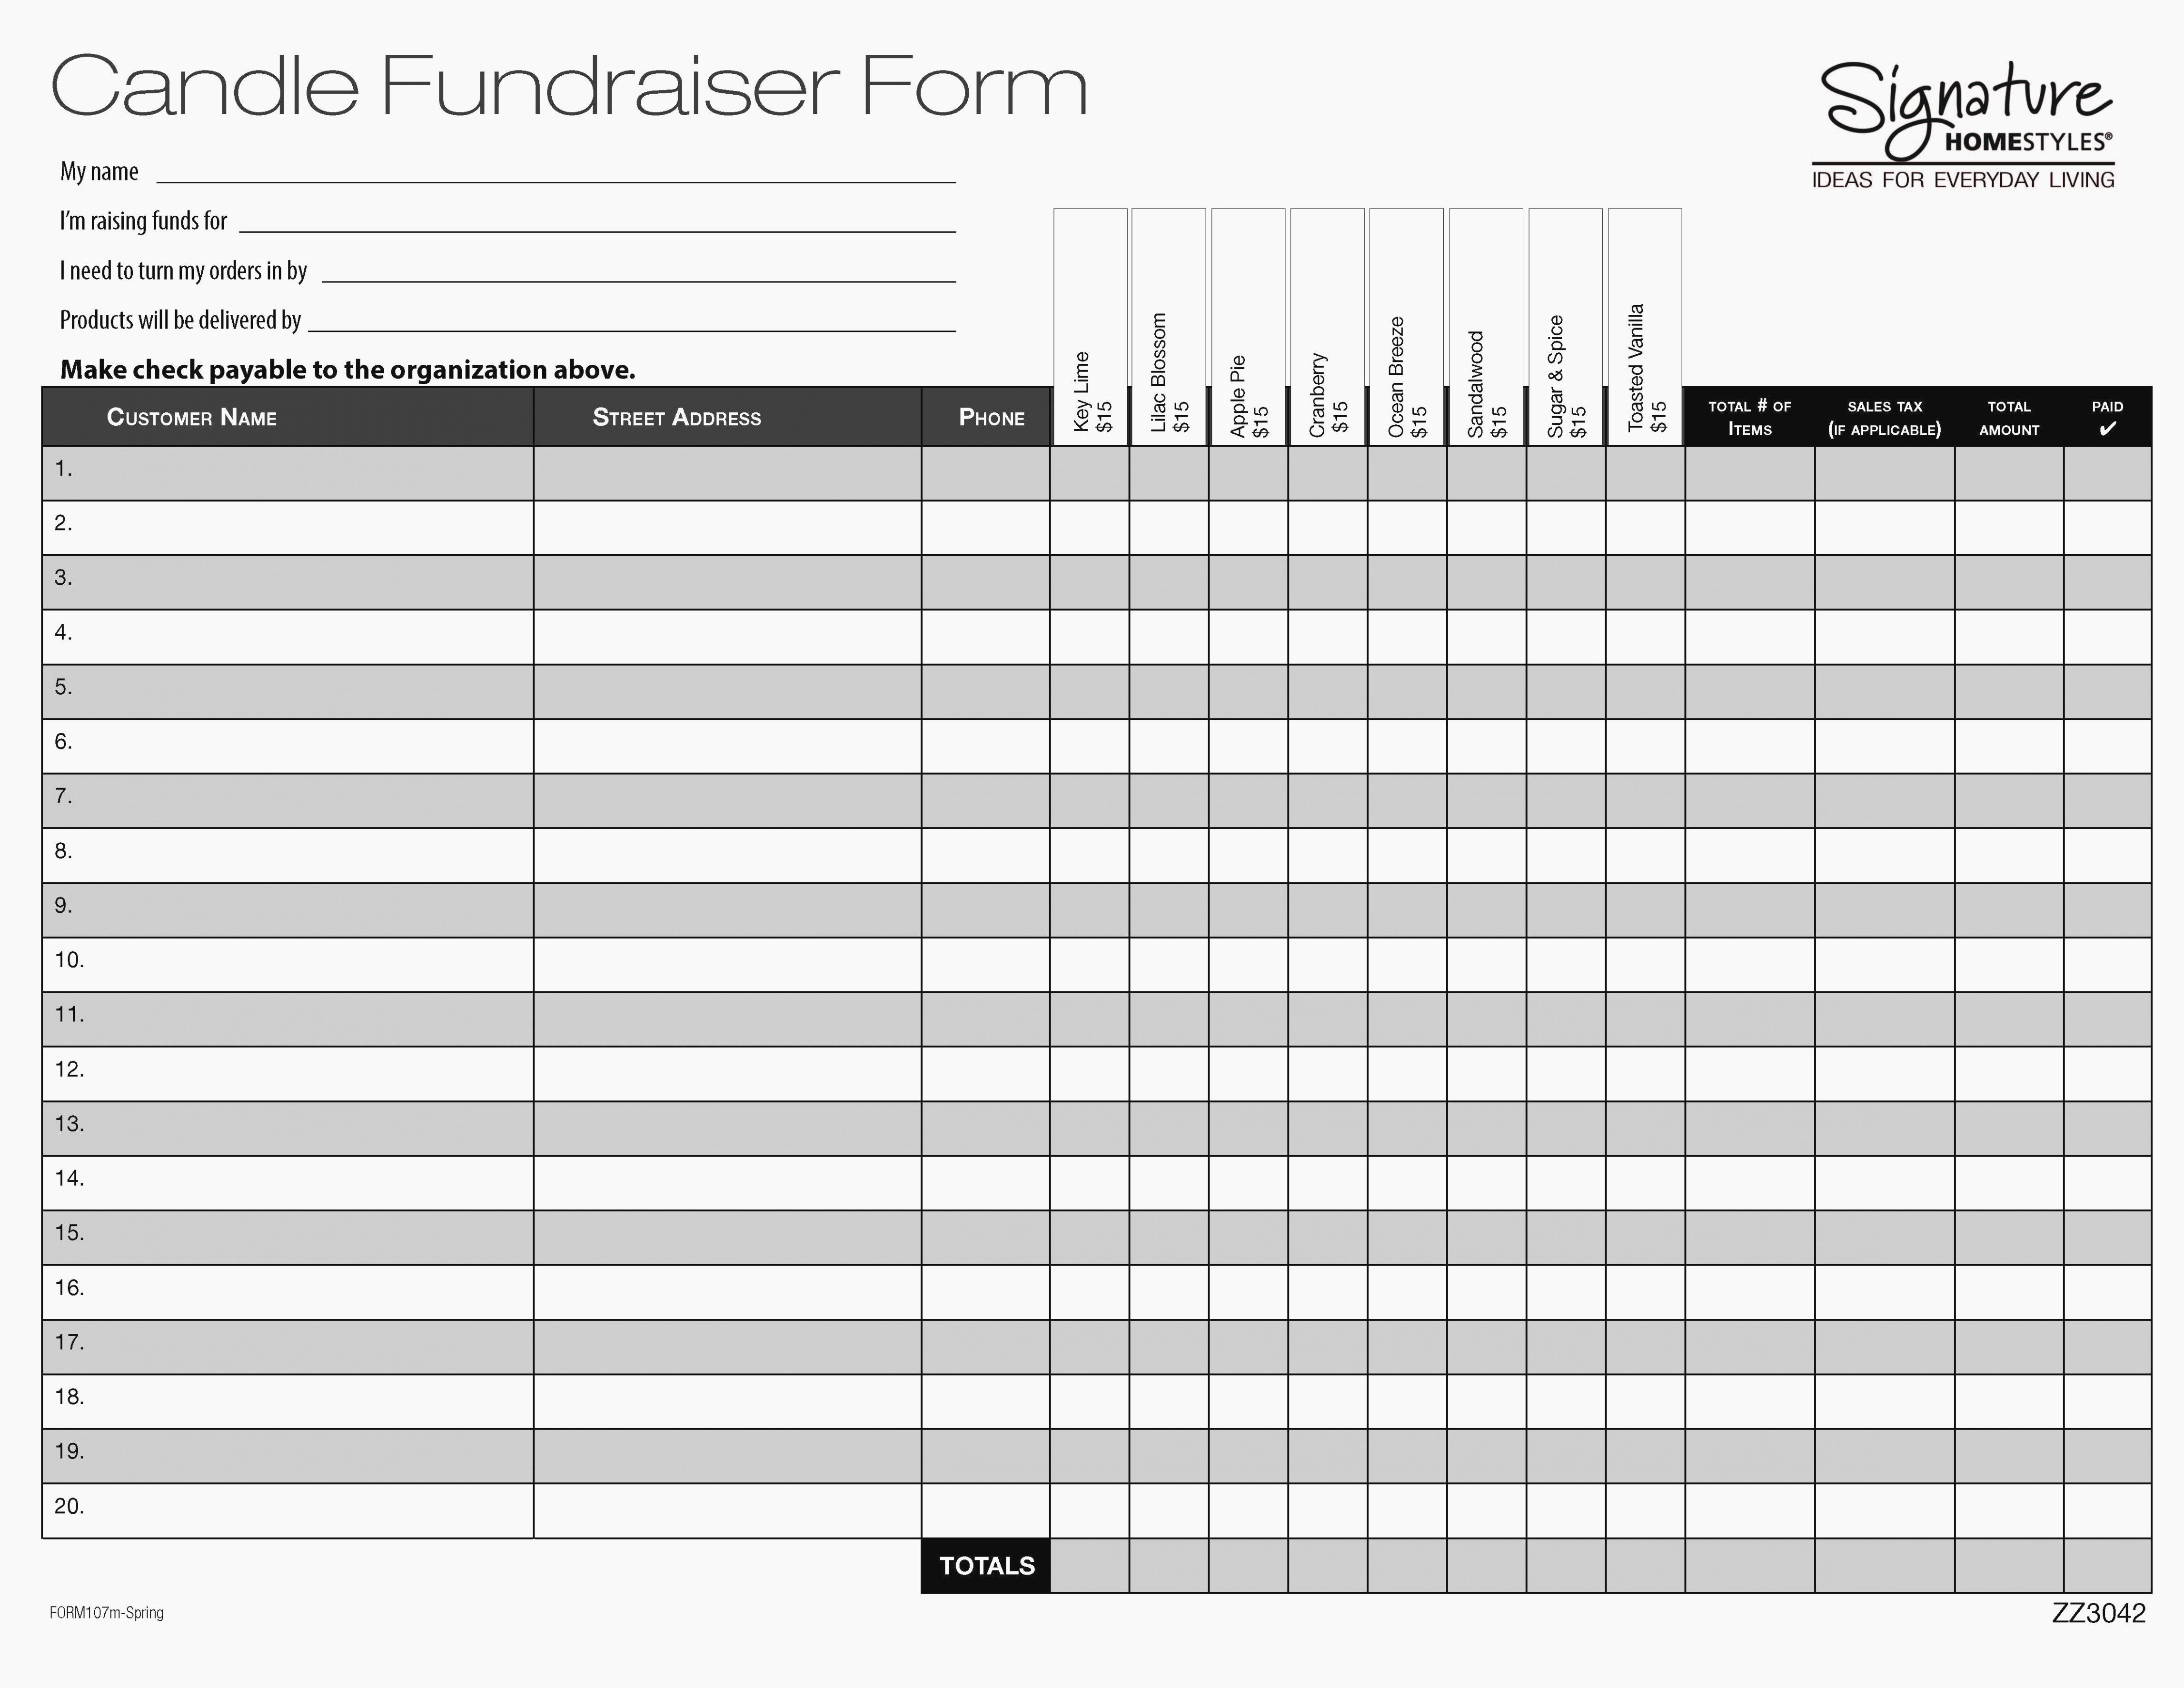 Fundraiser form Template Free Best Of 12 Ideas to organize Your Own Fundraiser